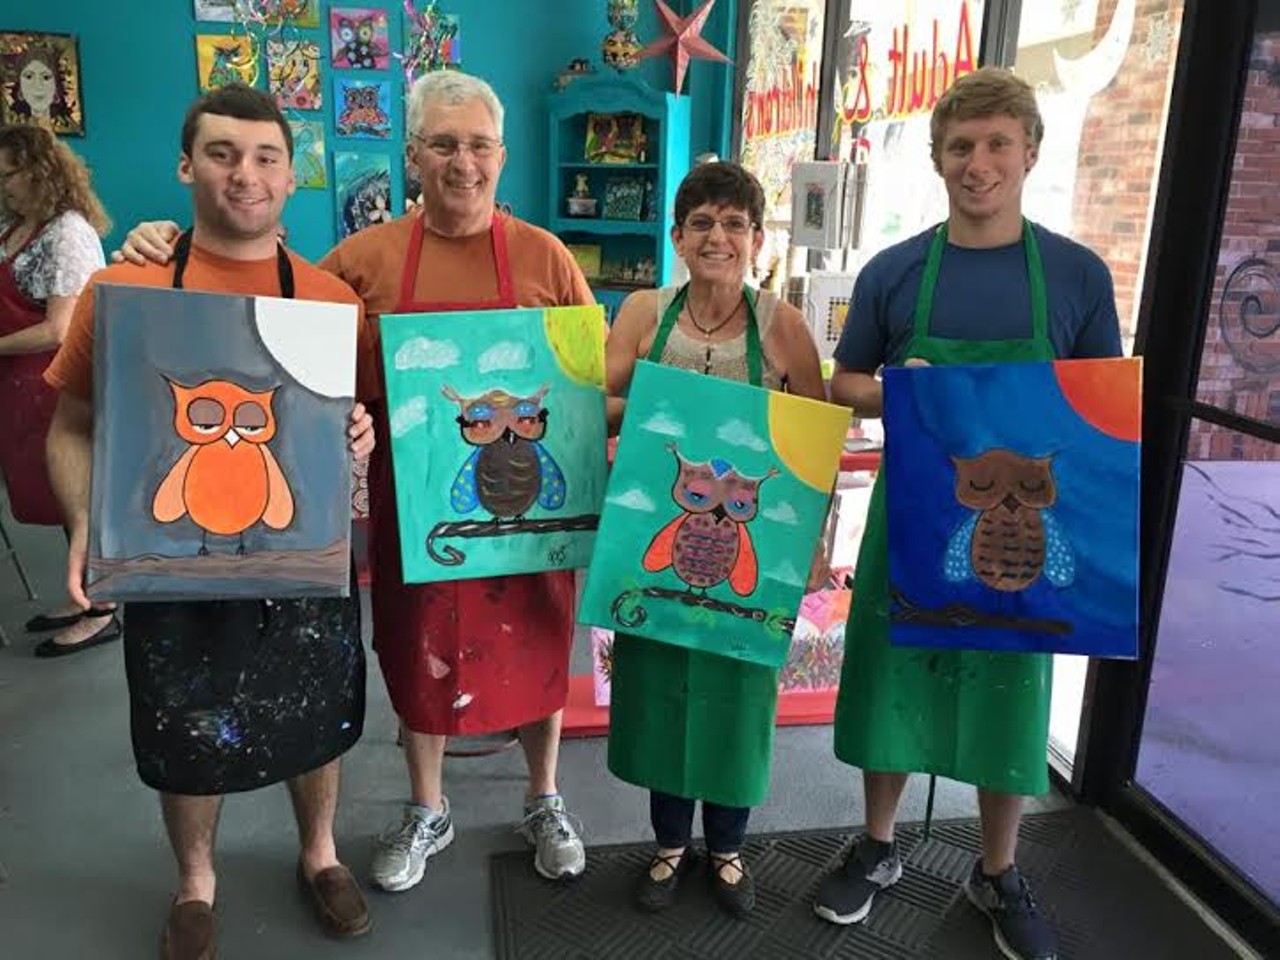 Whimsy Art Studio 
SPONSORED
Bring your family to Whimsy Art Studio for an unforgettable experience. Classes are offered for all ages with private parties and reservations available. Make painting fun while you create memories that will last forever! Sign up online or call us today!
2211 NW Military Hwy. Ste. 116, (210)460-6610, whimsyartstudio.com